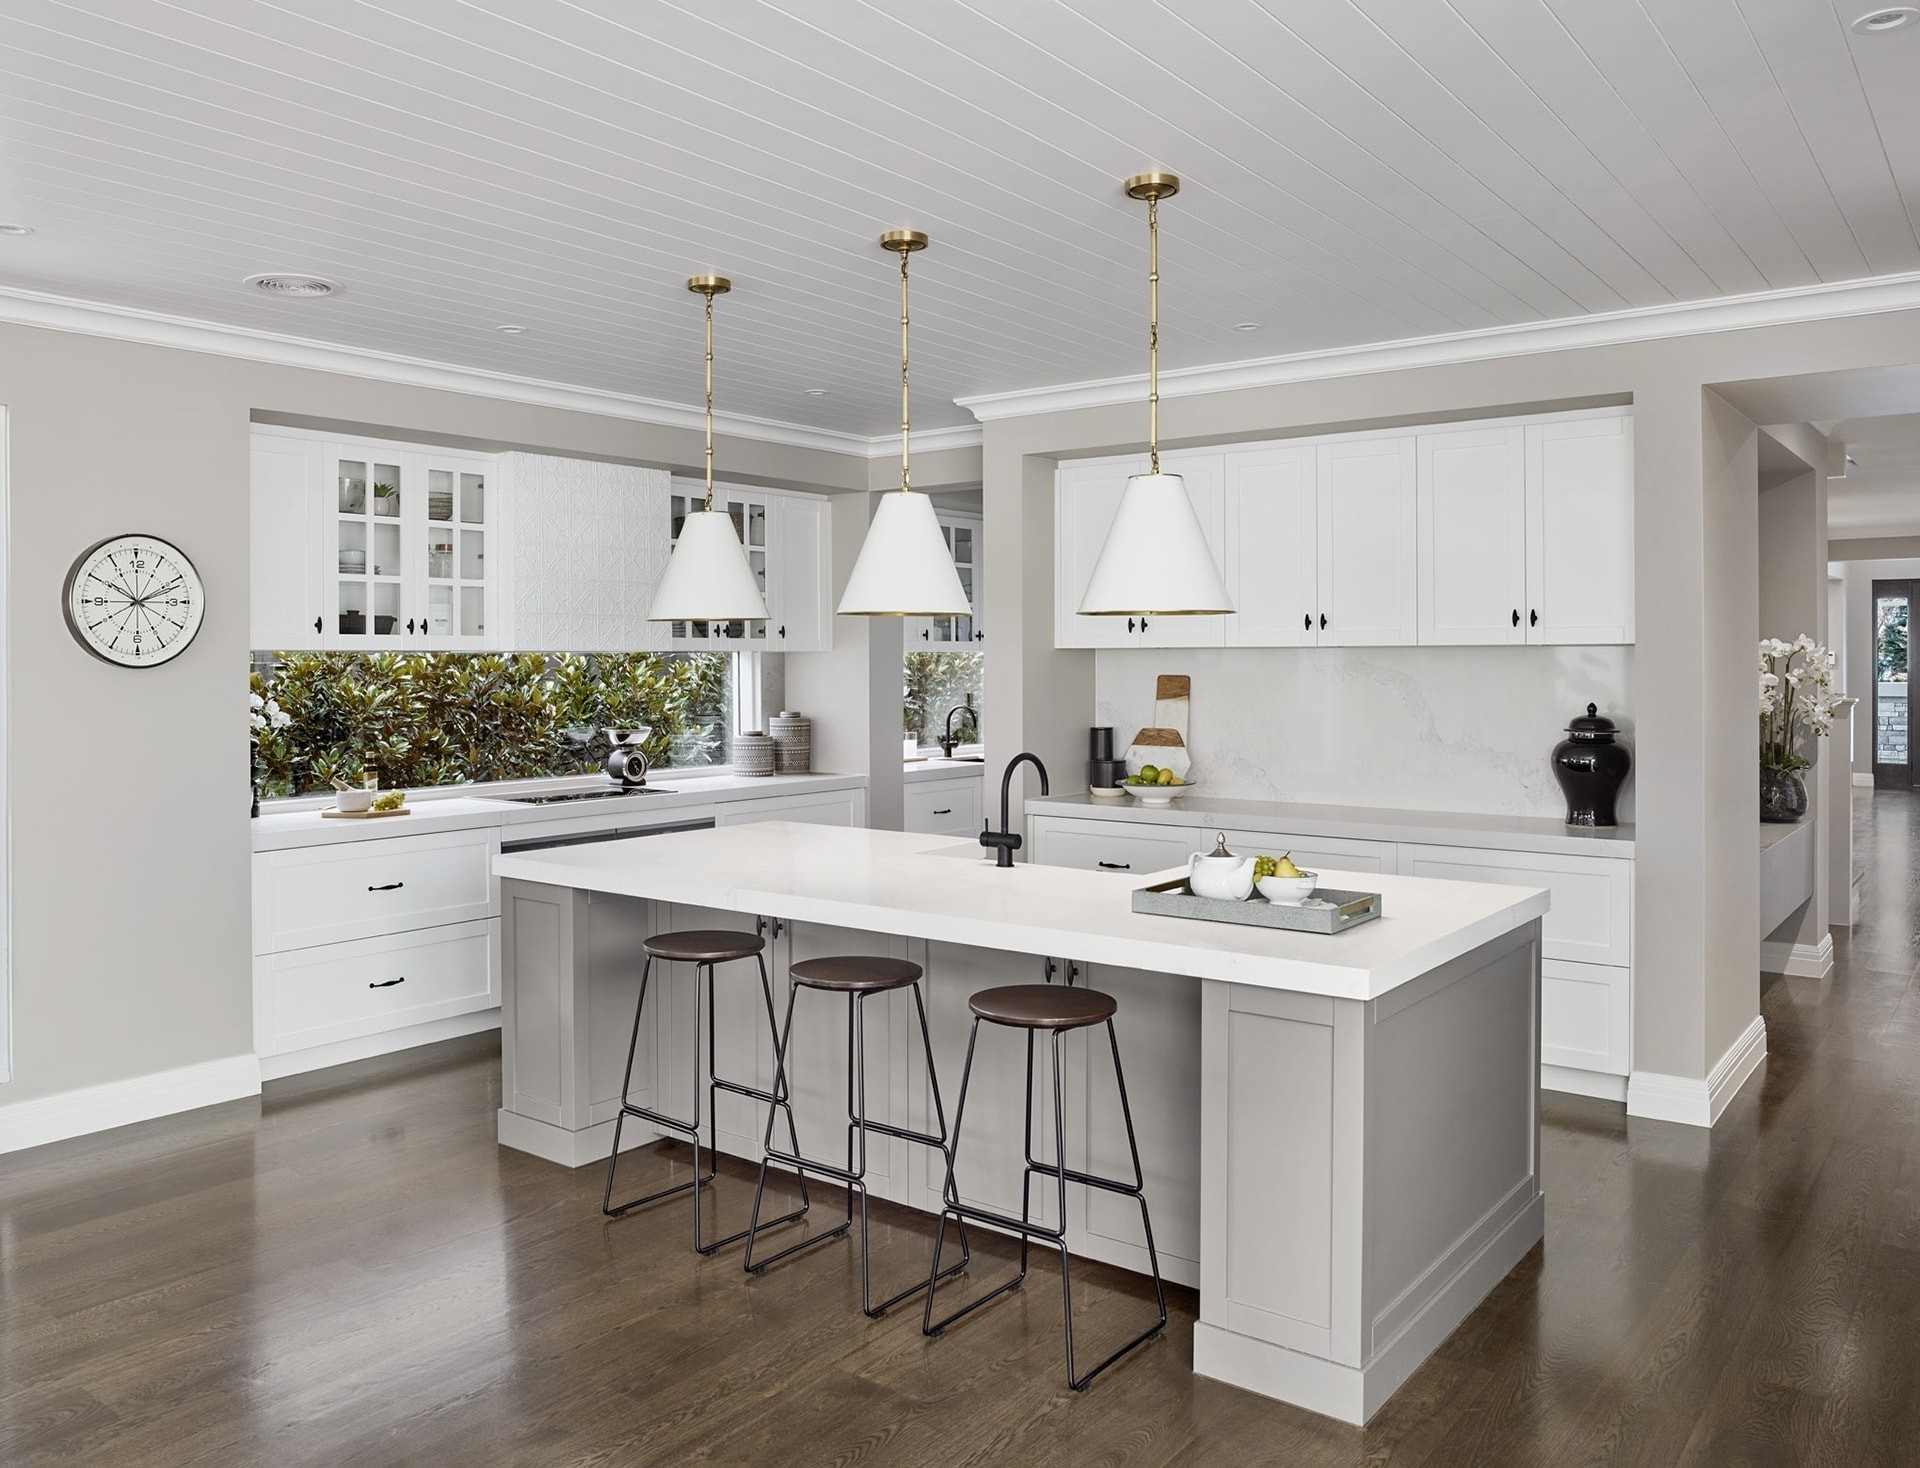 hamptons style kitchen from metricon bayville display home